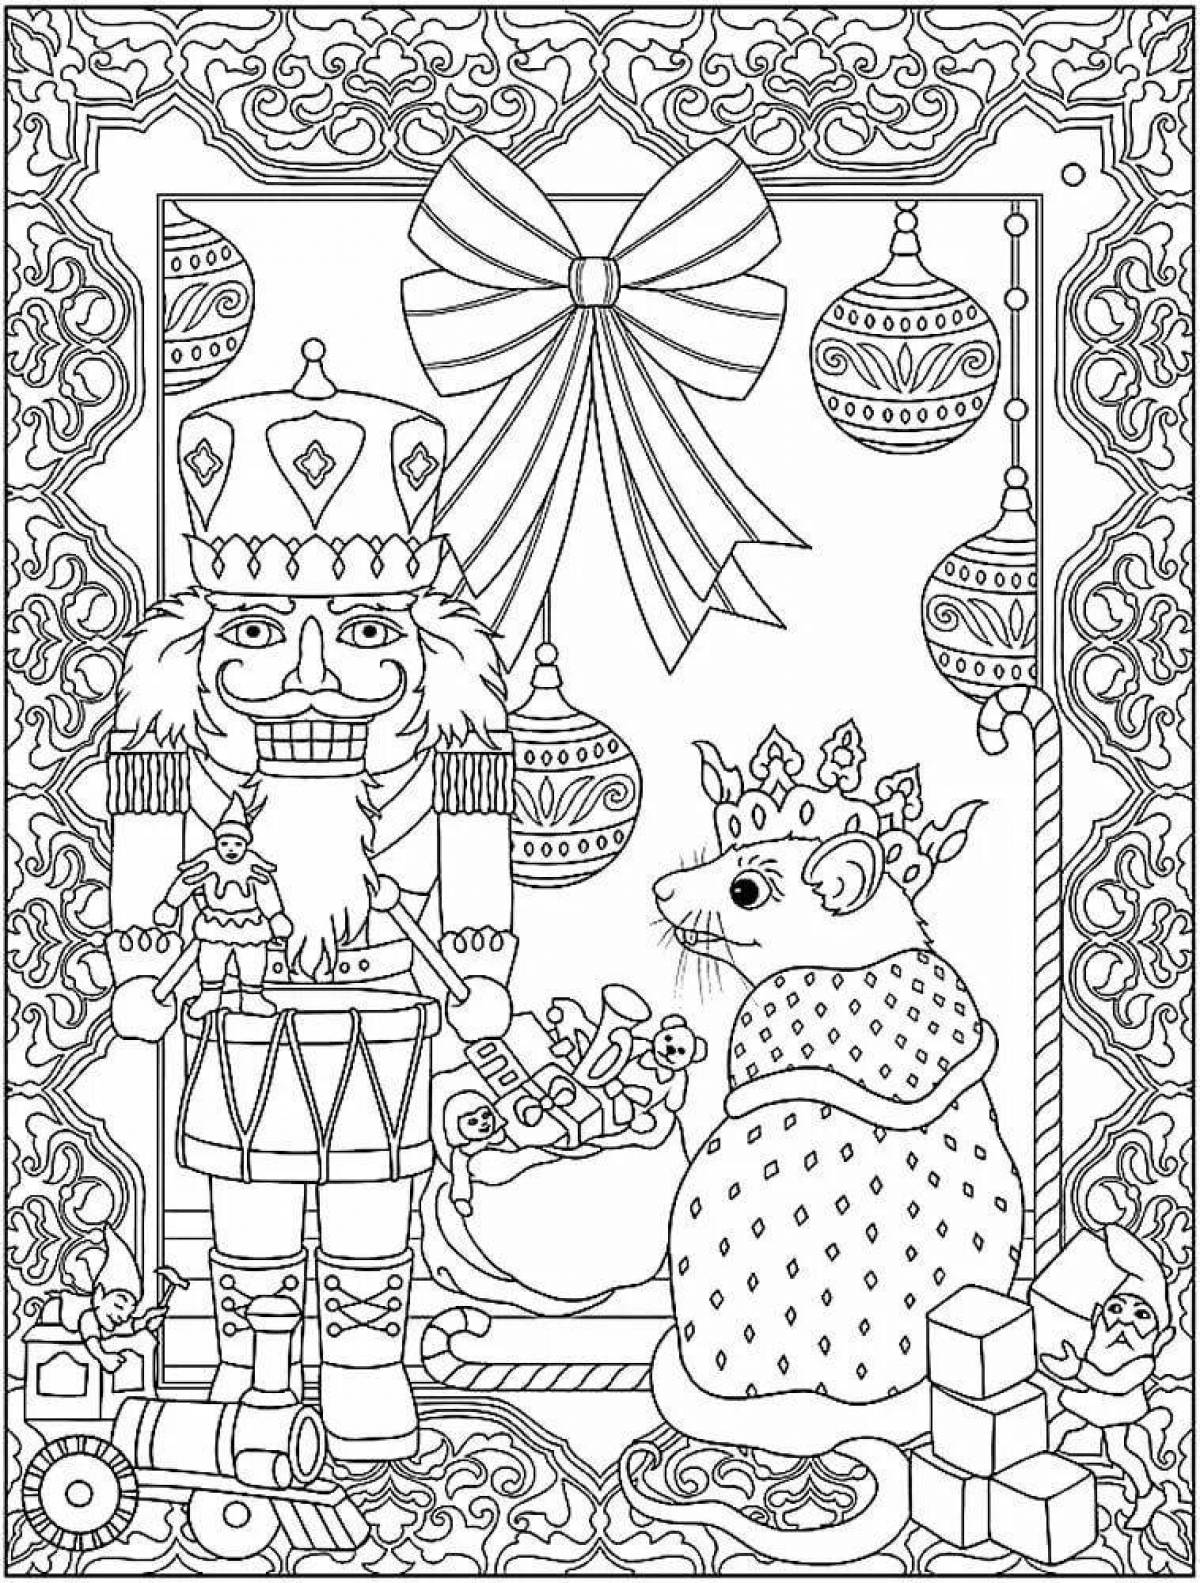 Adorable Mouse King coloring page